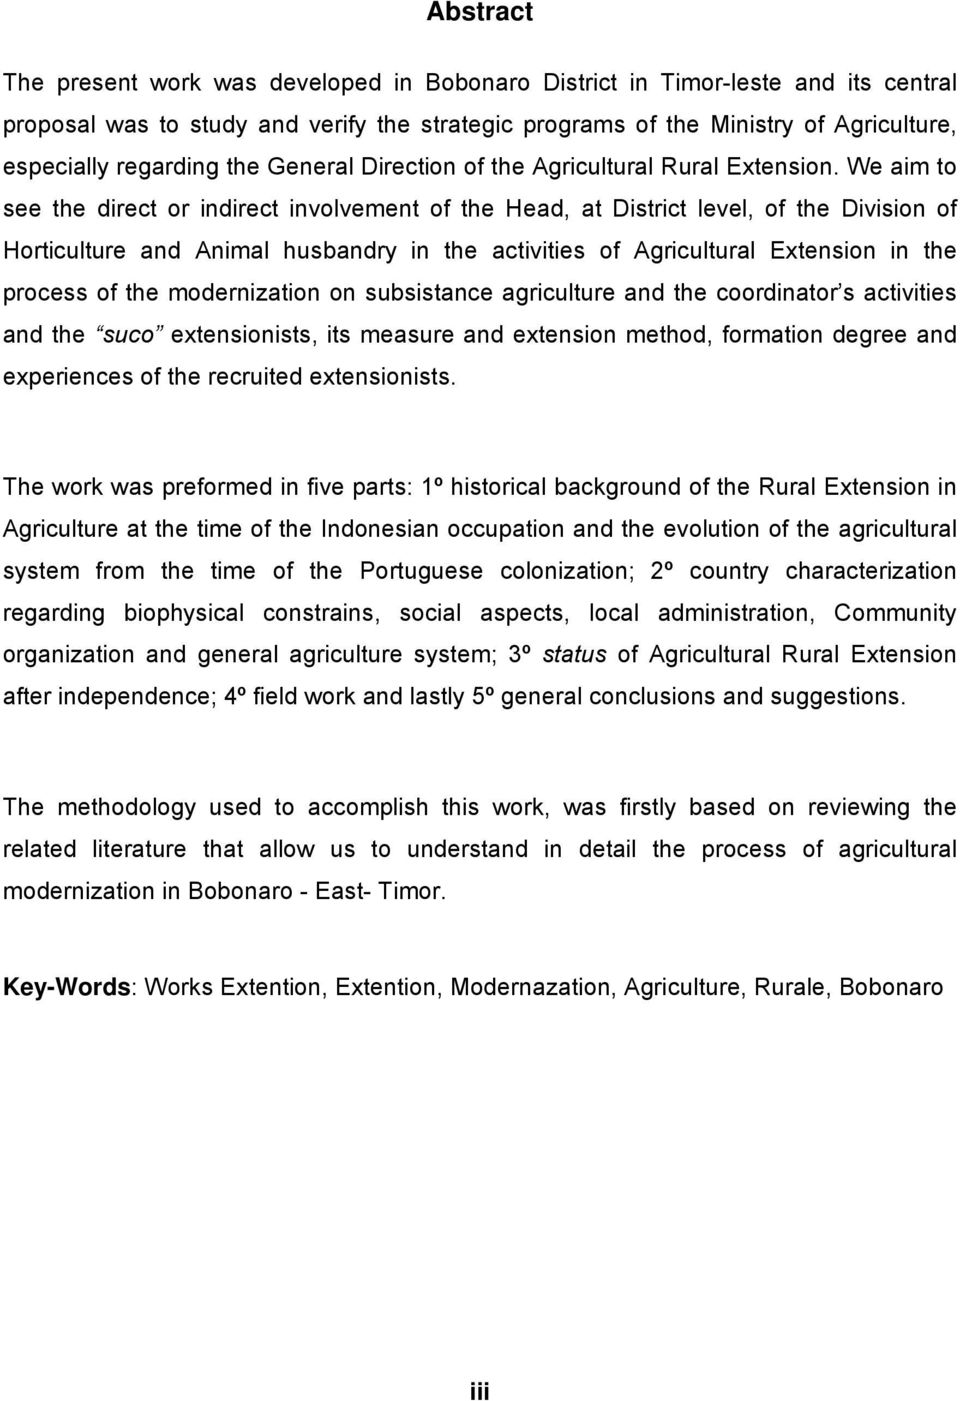 We aim to see the direct or indirect involvement of the Head, at District level, of the Division of Horticulture and Animal husbandry in the activities of Agricultural Extension in the process of the